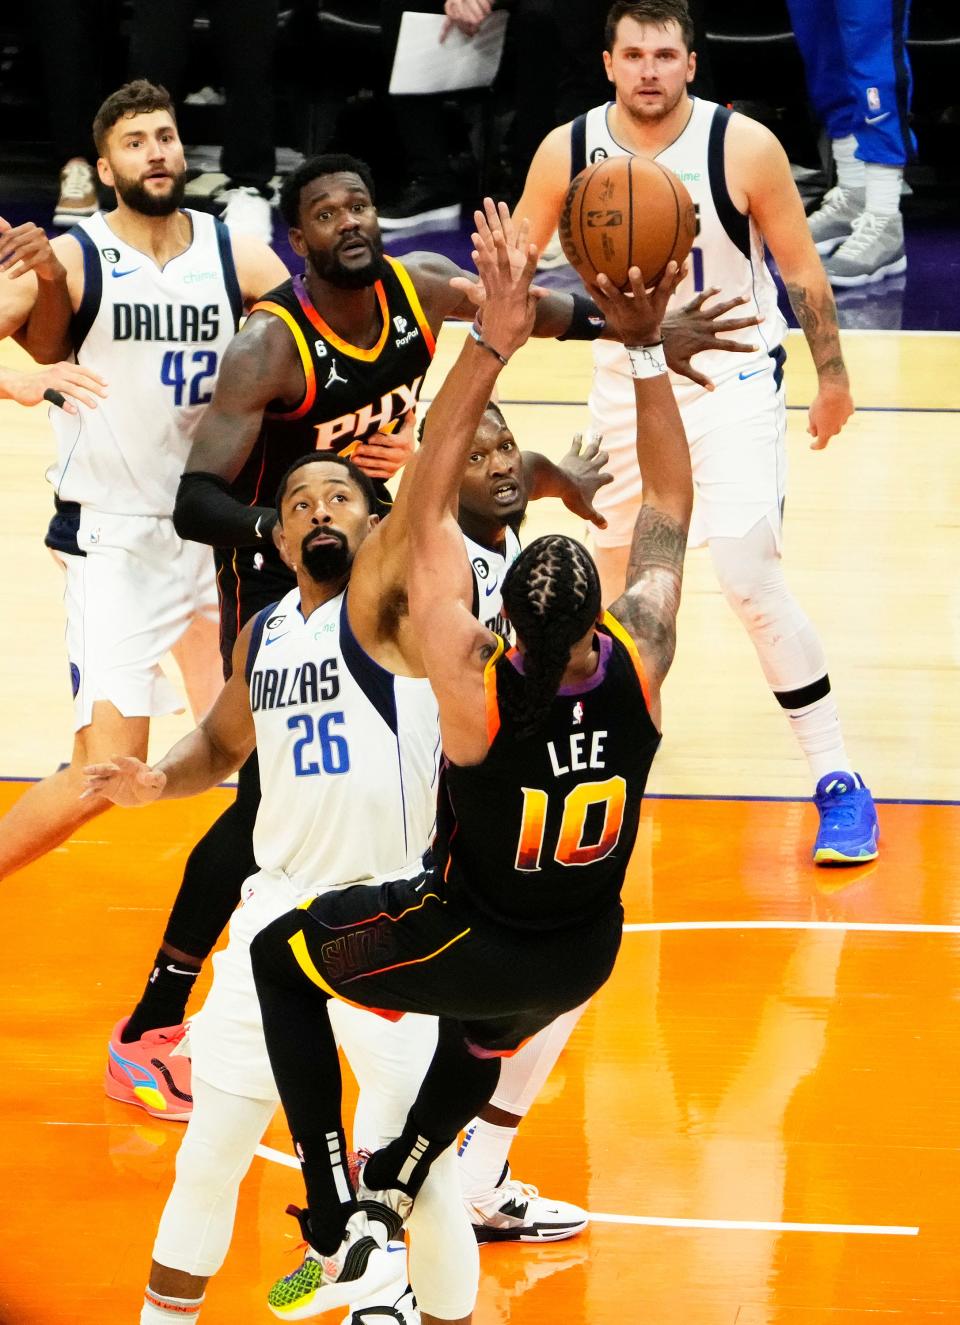 Phoenix Suns guard Damion Lee (10) makes the game-winning shot over Dallas Mavericks guard Spencer Dinwiddie (26) in the second half during the season opener at Footprint Center in Phoenix on Oct. 19, 2022.